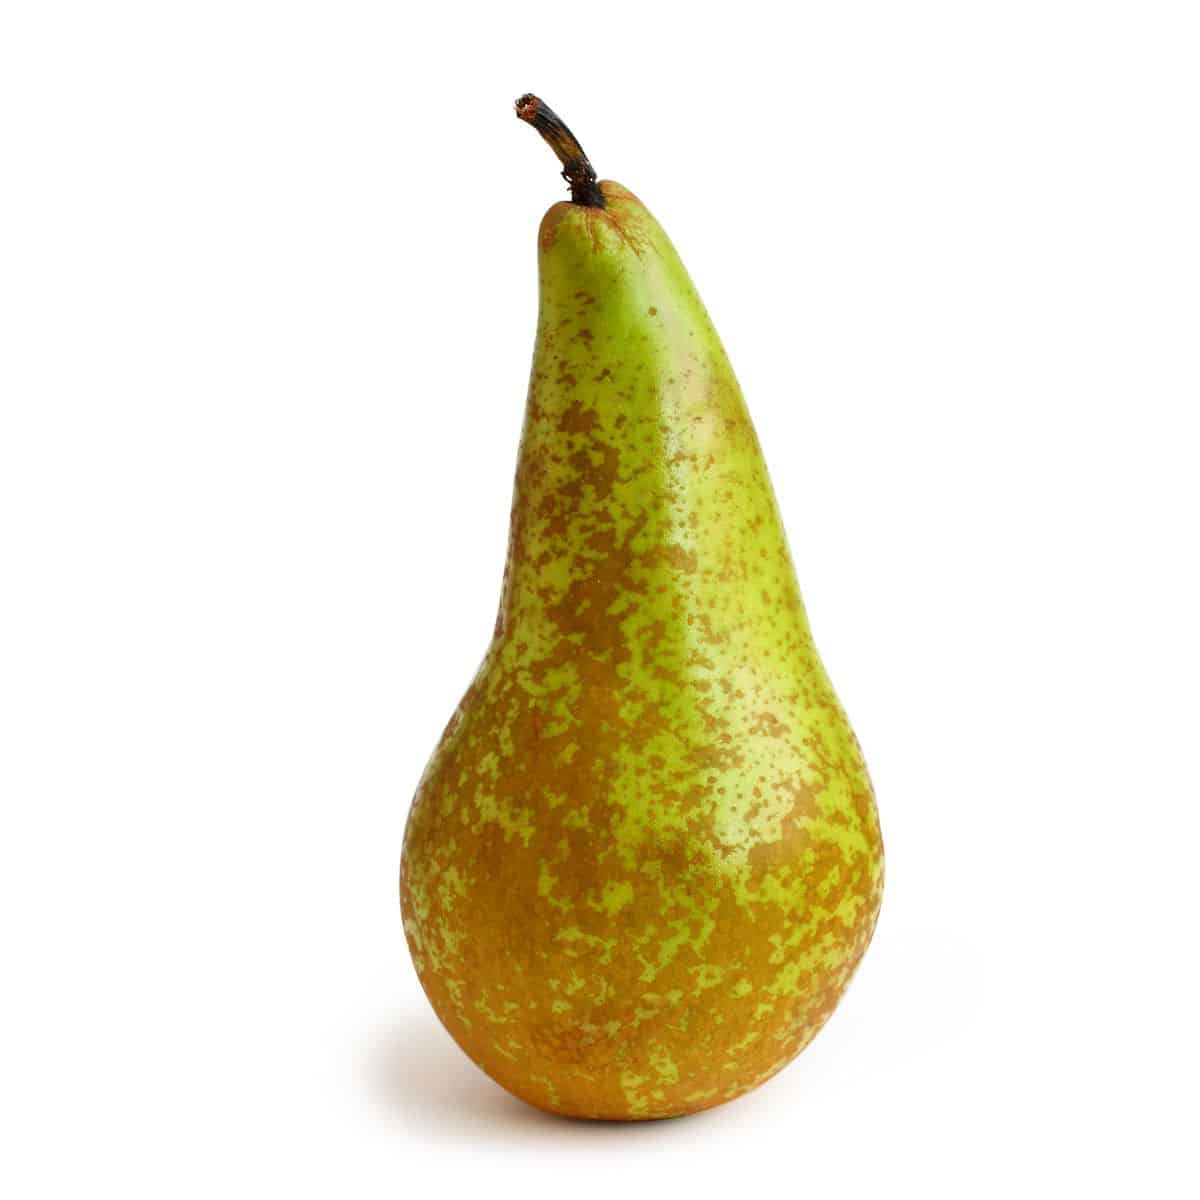 conference pear on a white background.